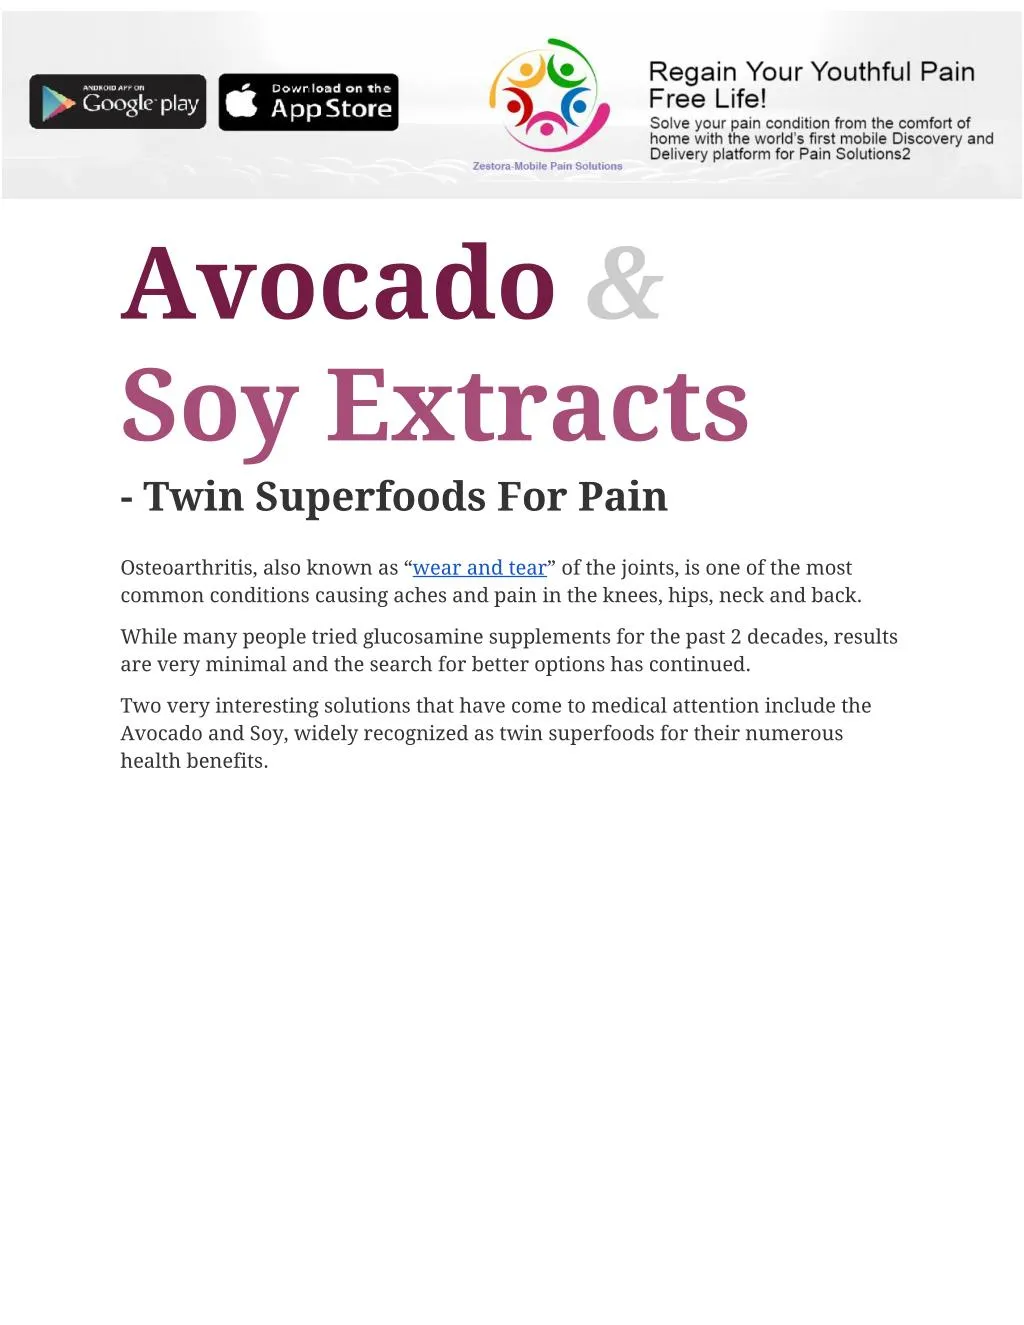 avocado soy extracts twin superfoods for pain